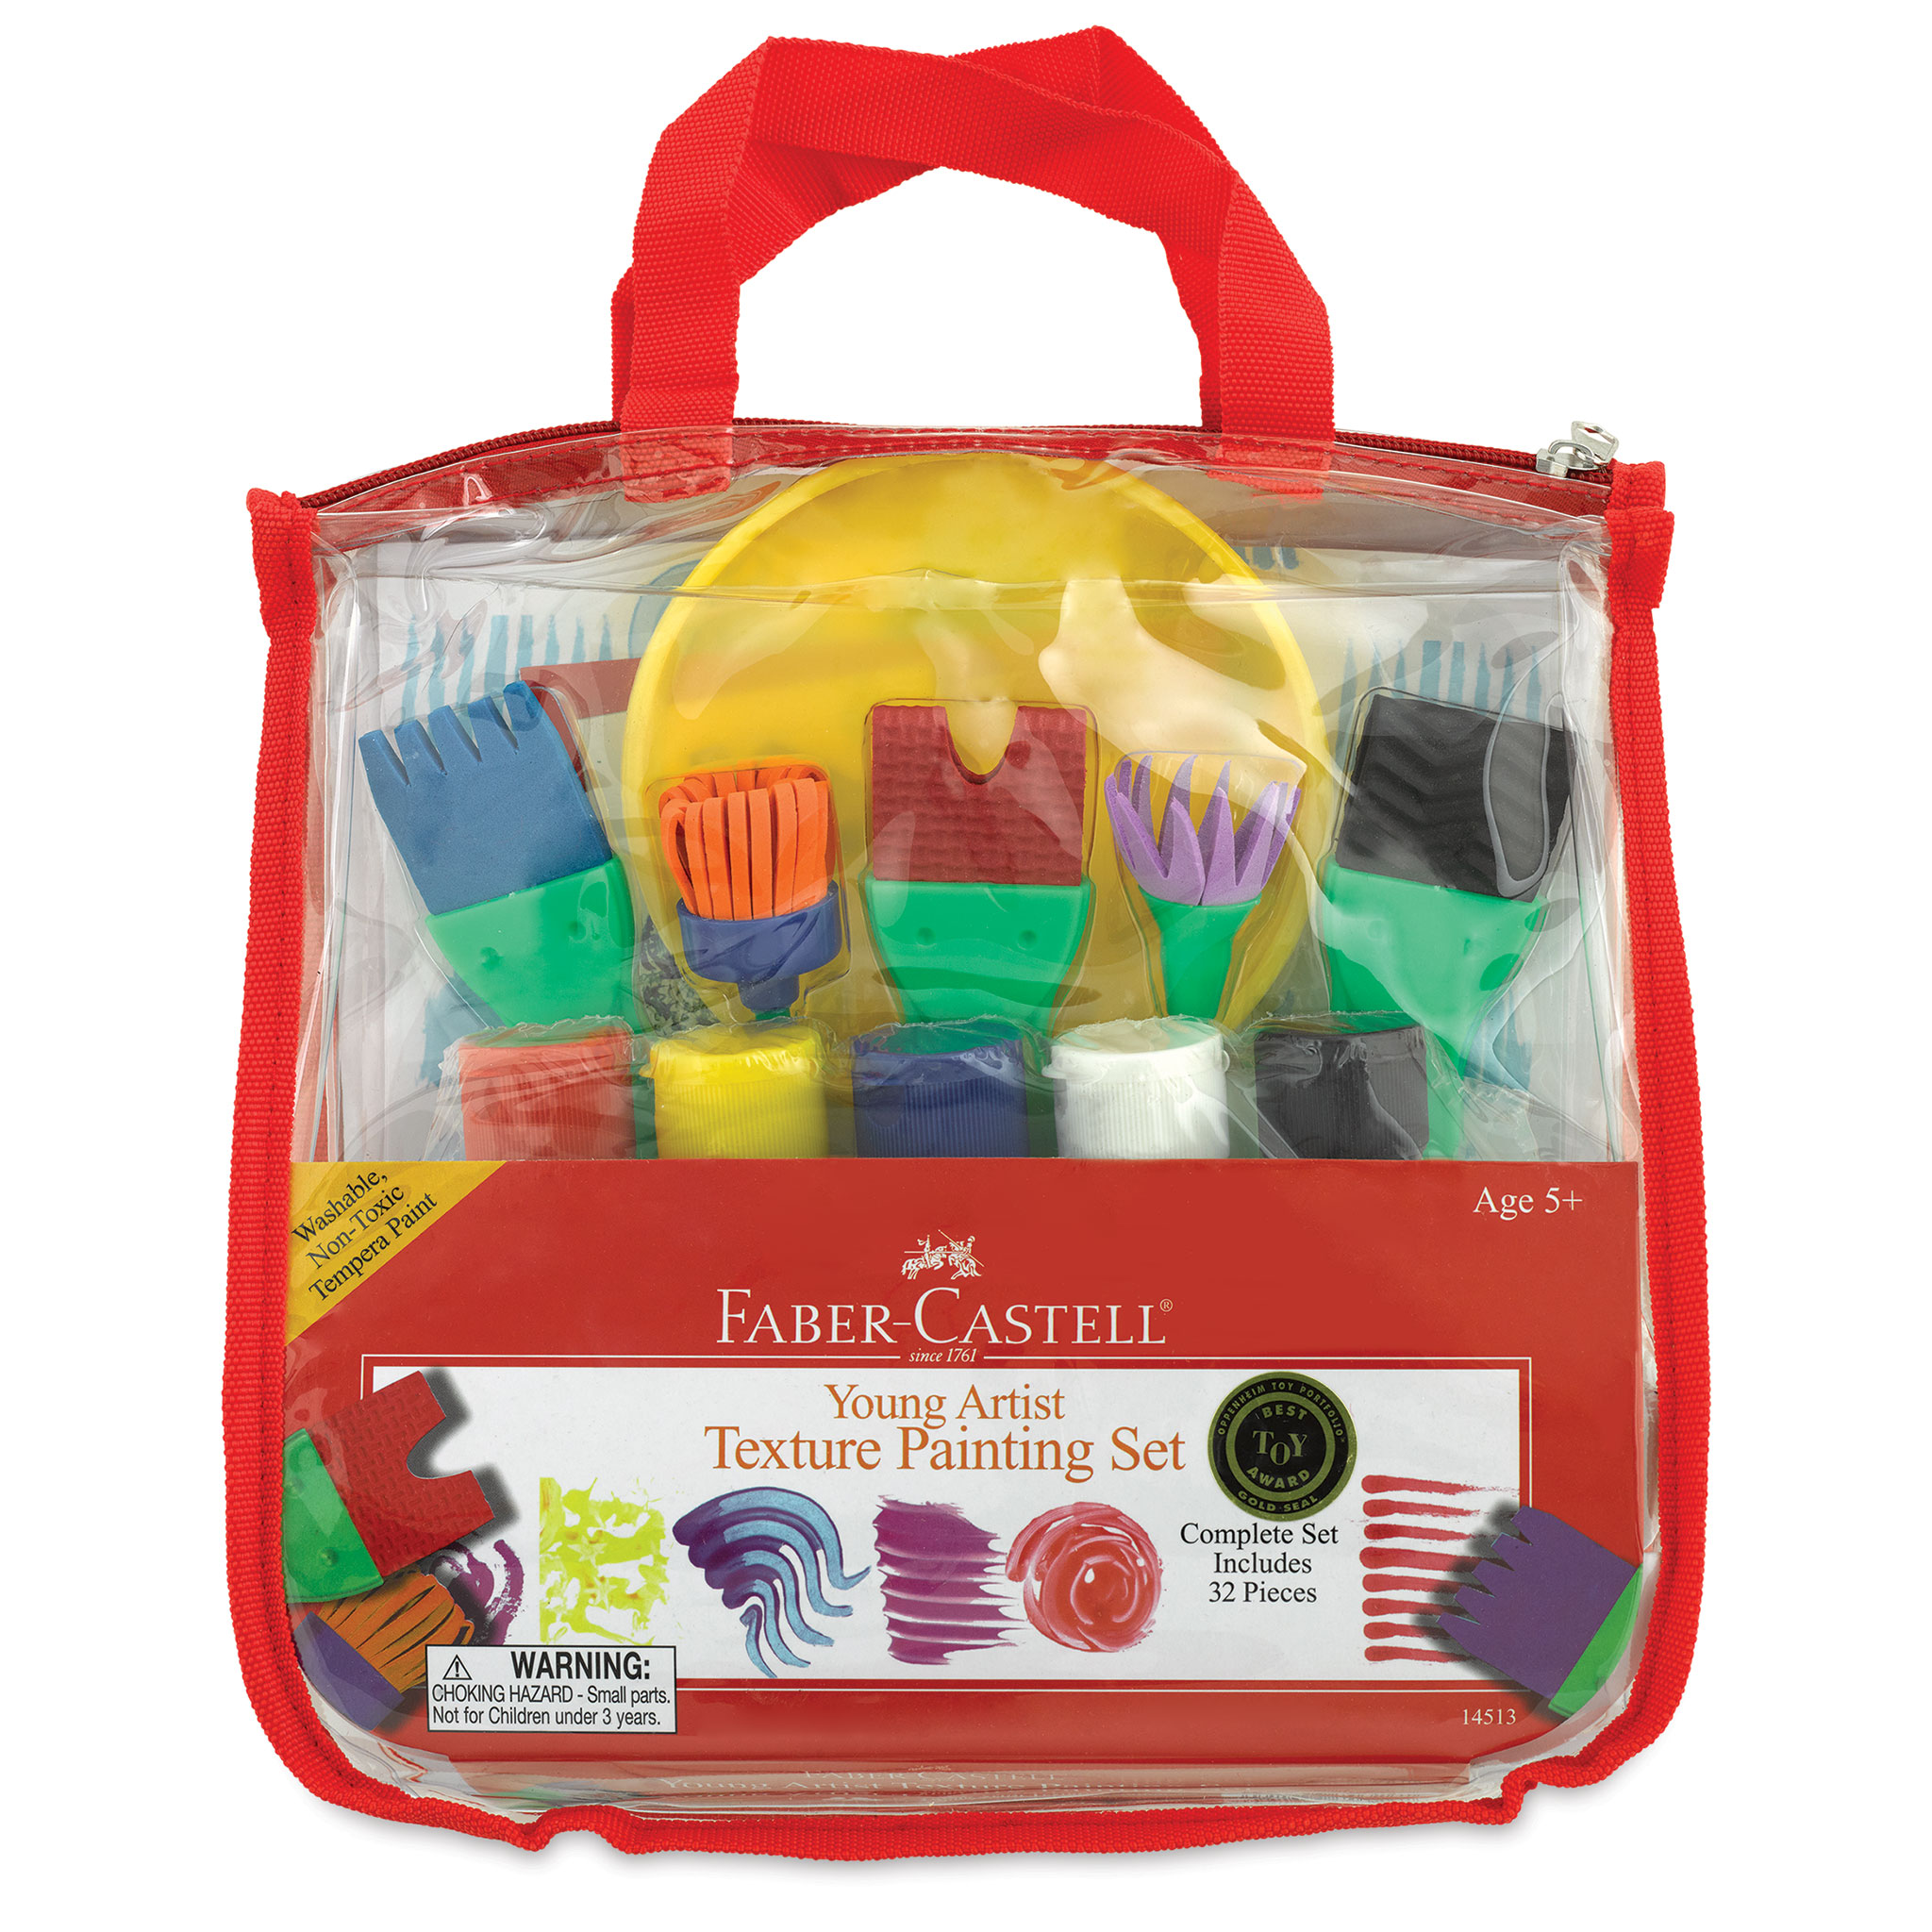  Faber-Castell Young Artist Learn to Paint Set